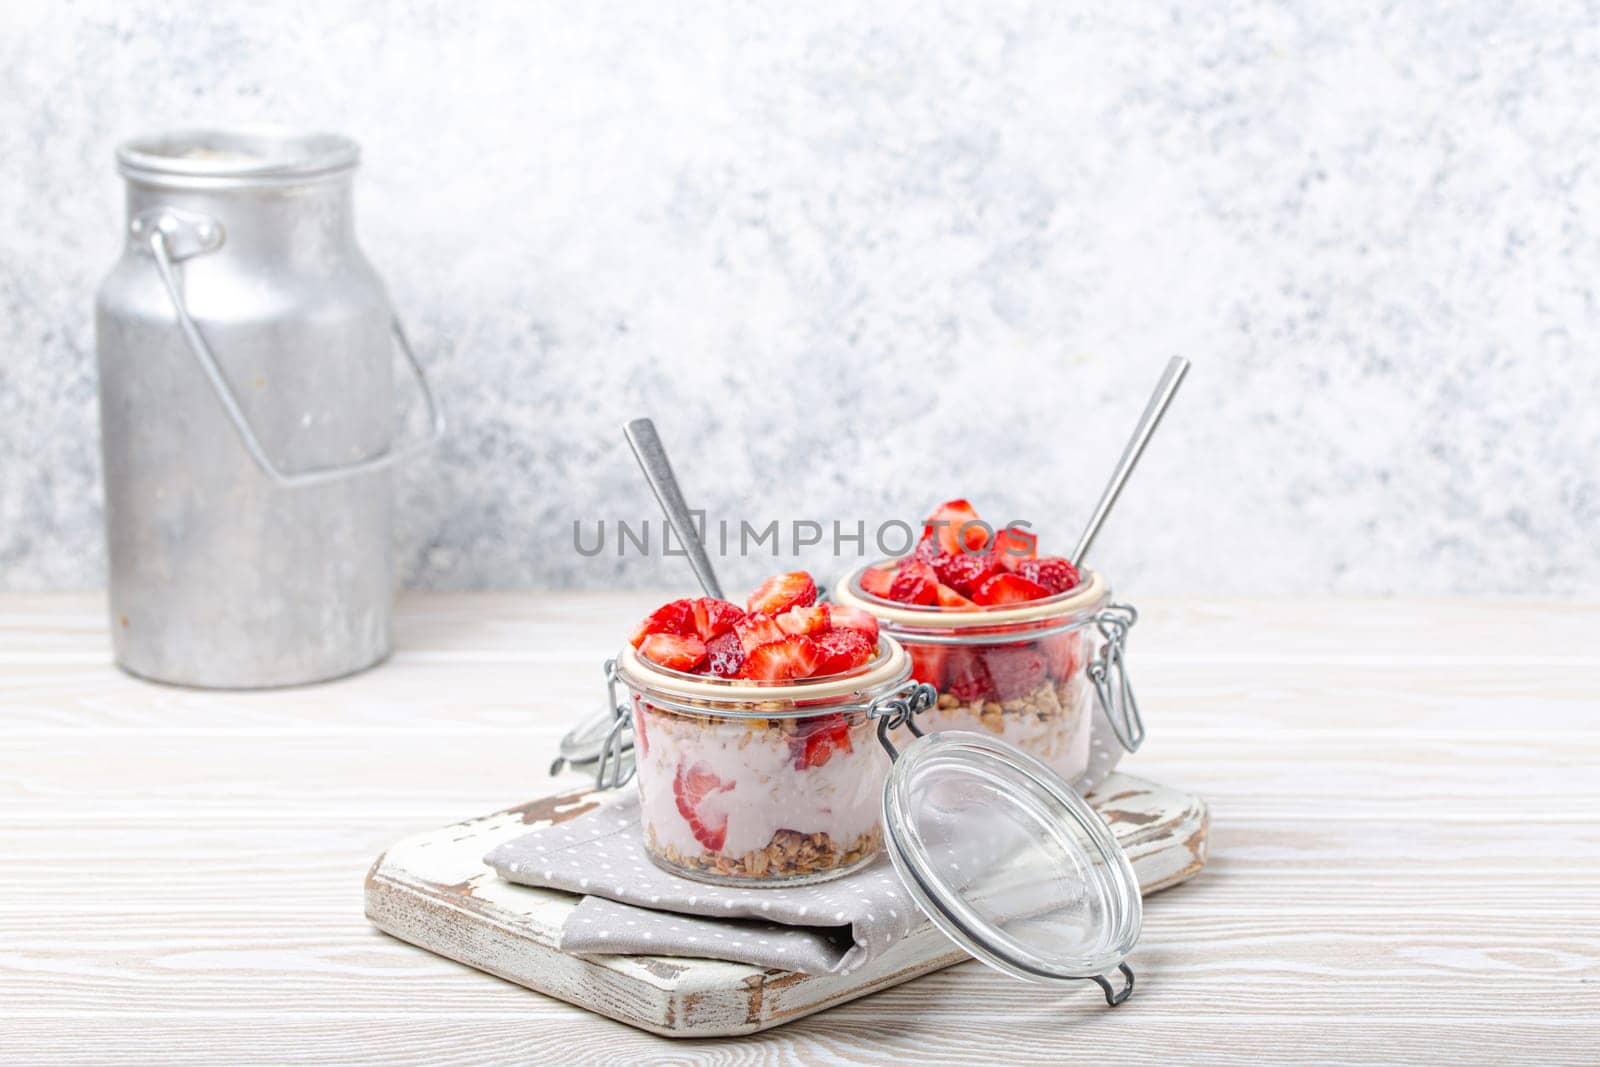 Parfait with Strawberries, Yoghurt and Granola in Transparent Glass Mason Jars on White Rustic Wooden Background Angle View and Aluminium Milk Can, Healthy Breakfast or Summer Dessert, Copy Space by its_al_dente